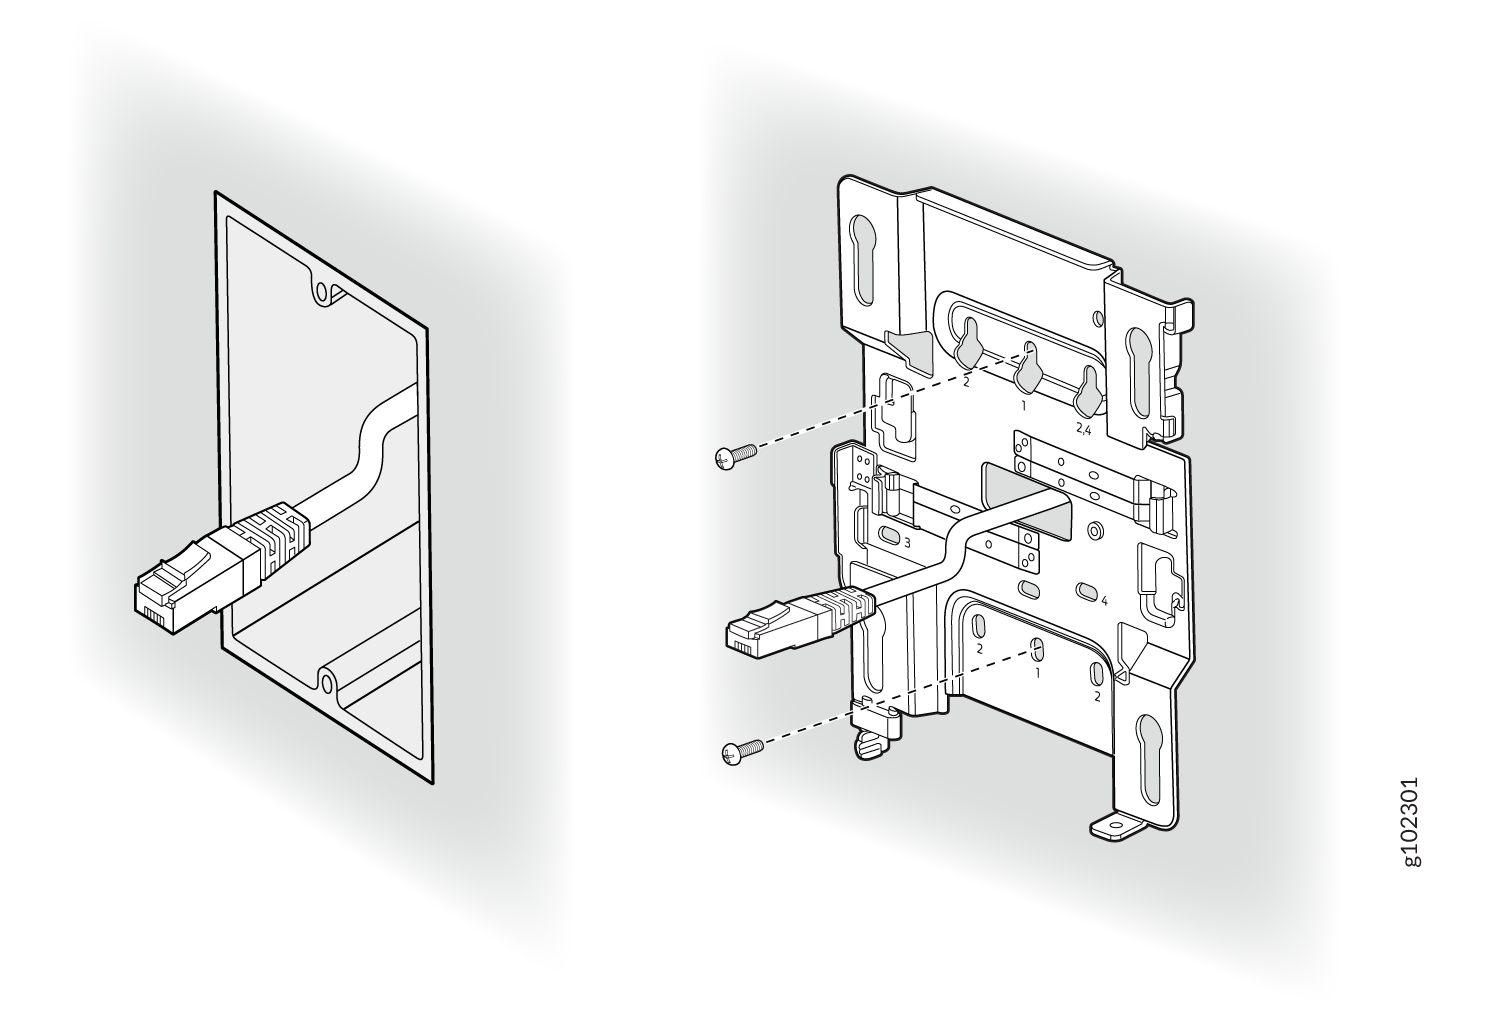 Attach the APBR-U Mounting Bracket to the Single-Gang Junction Box